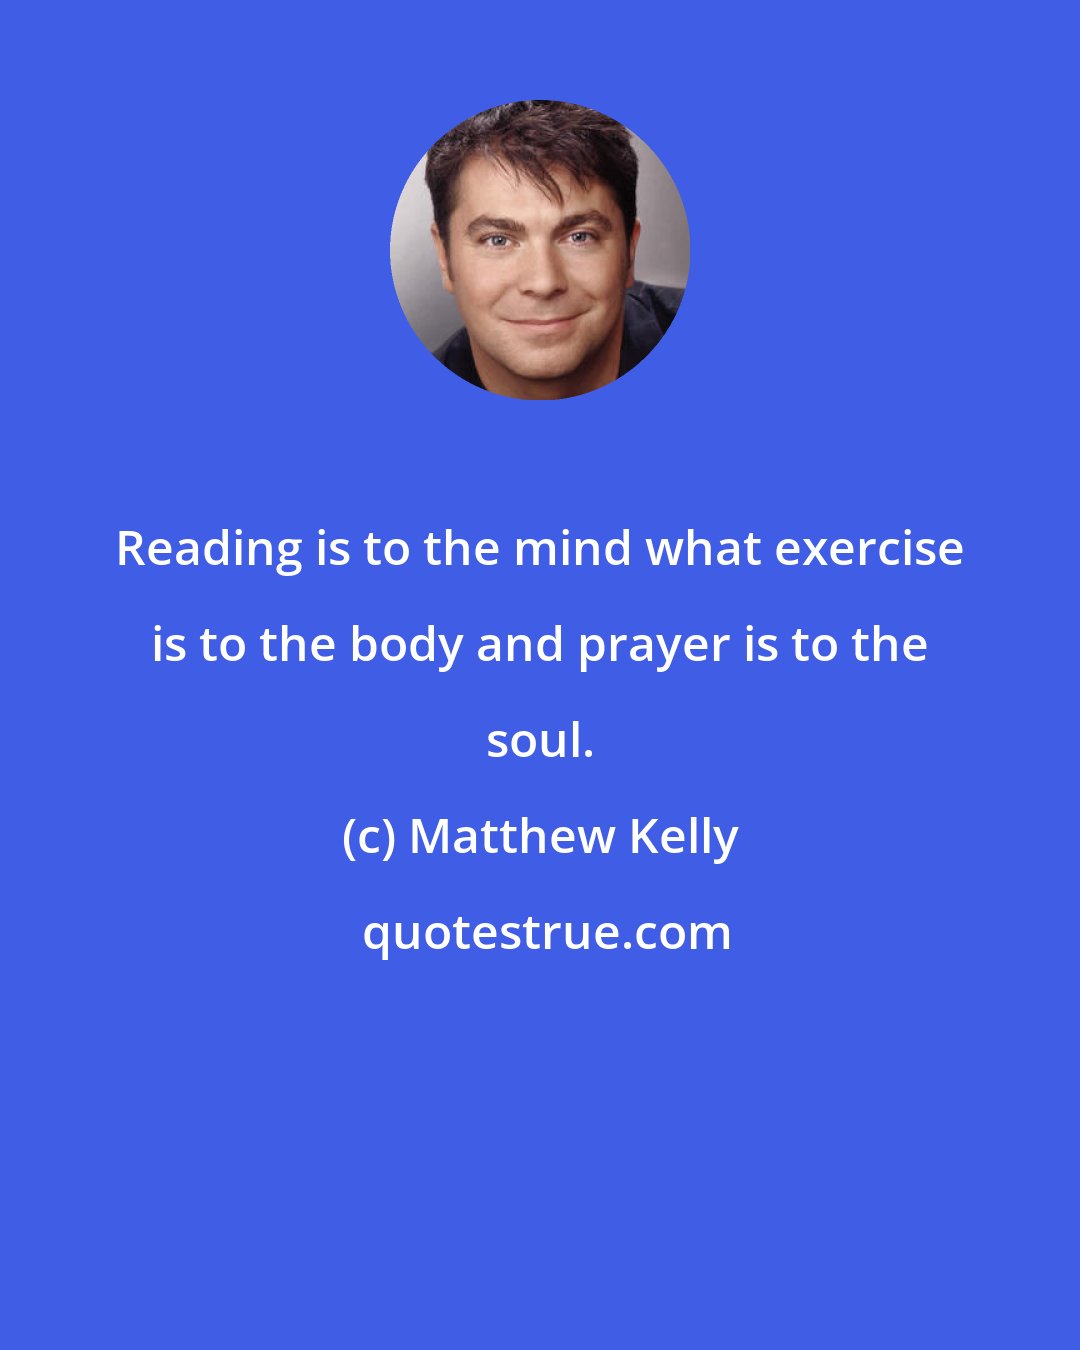 Matthew Kelly: Reading is to the mind what exercise is to the body and prayer is to the soul.